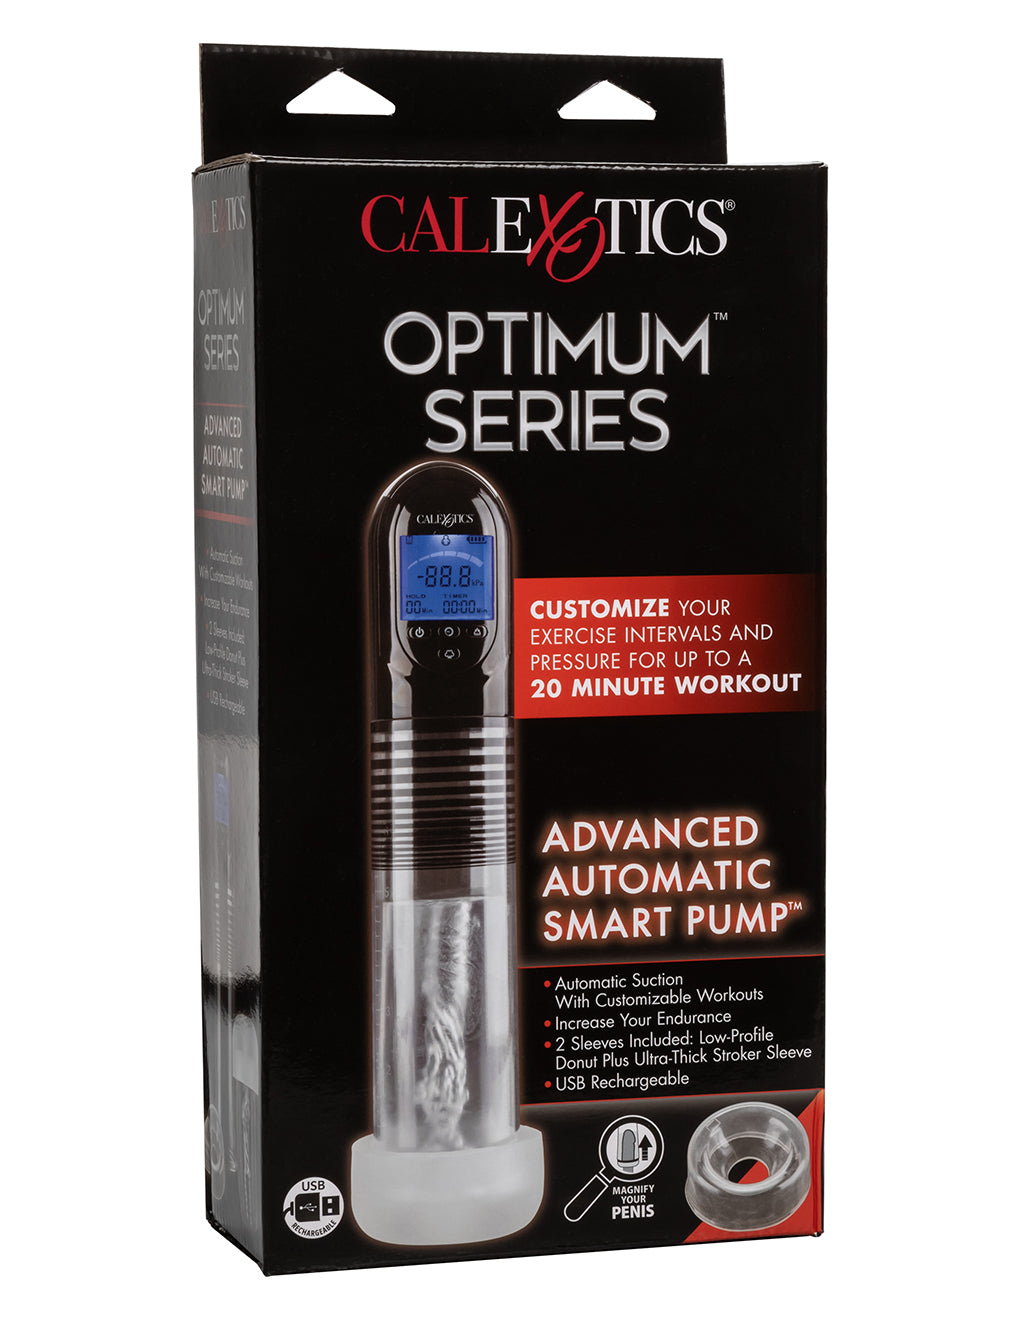 Advanced Automatic Smart Pump- package